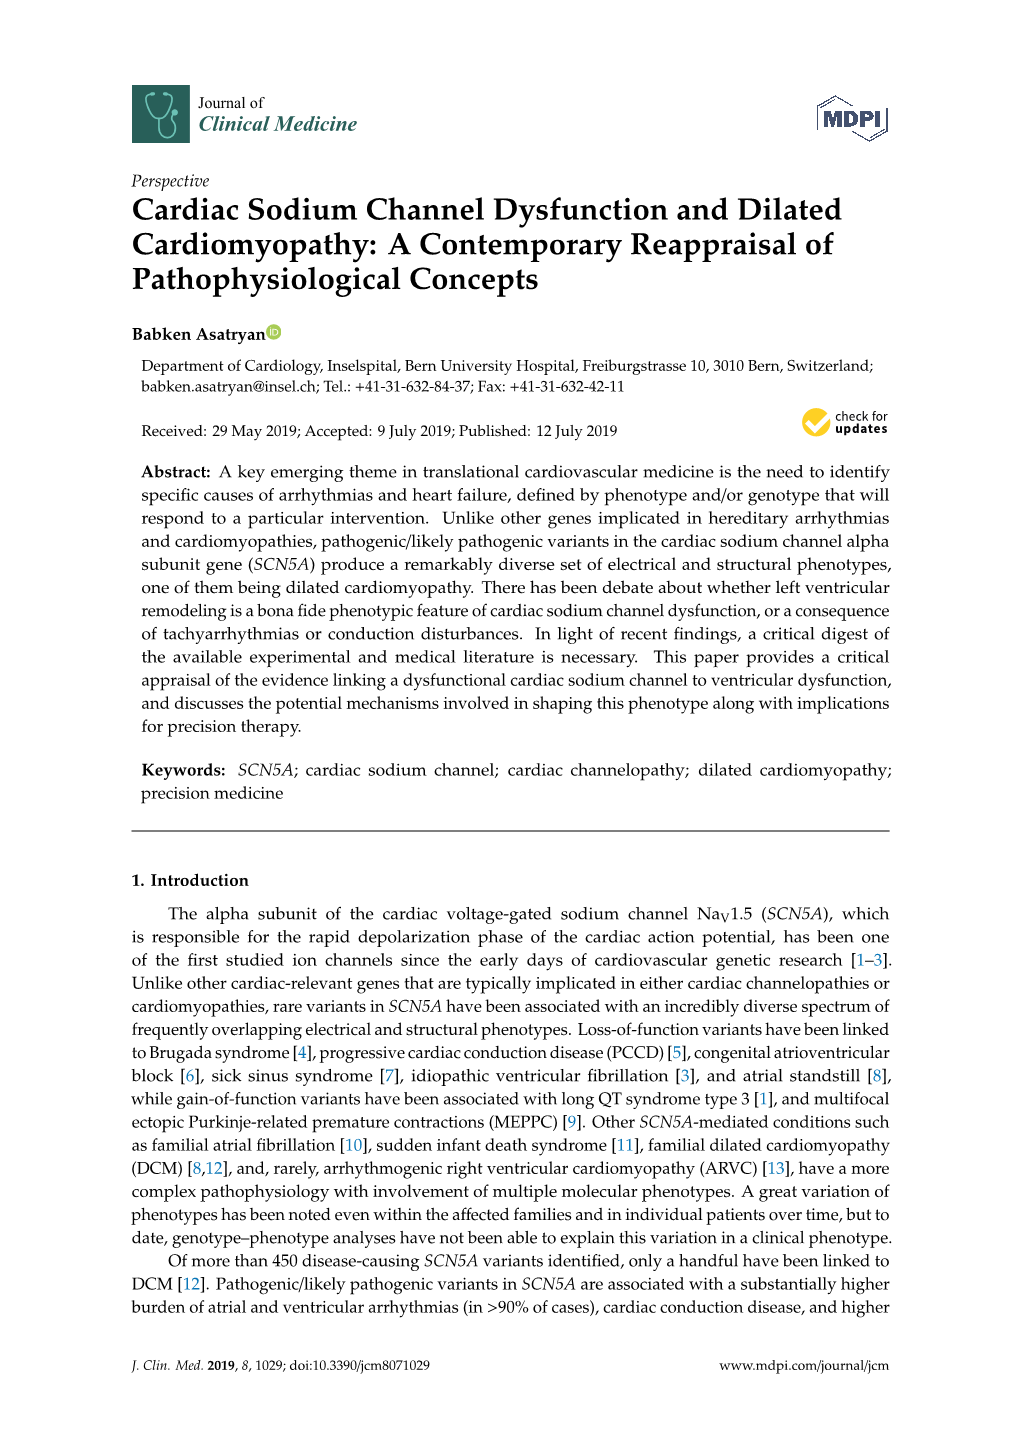 Cardiac Sodium Channel Dysfunction and Dilated Cardiomyopathy: a Contemporary Reappraisal of Pathophysiological Concepts